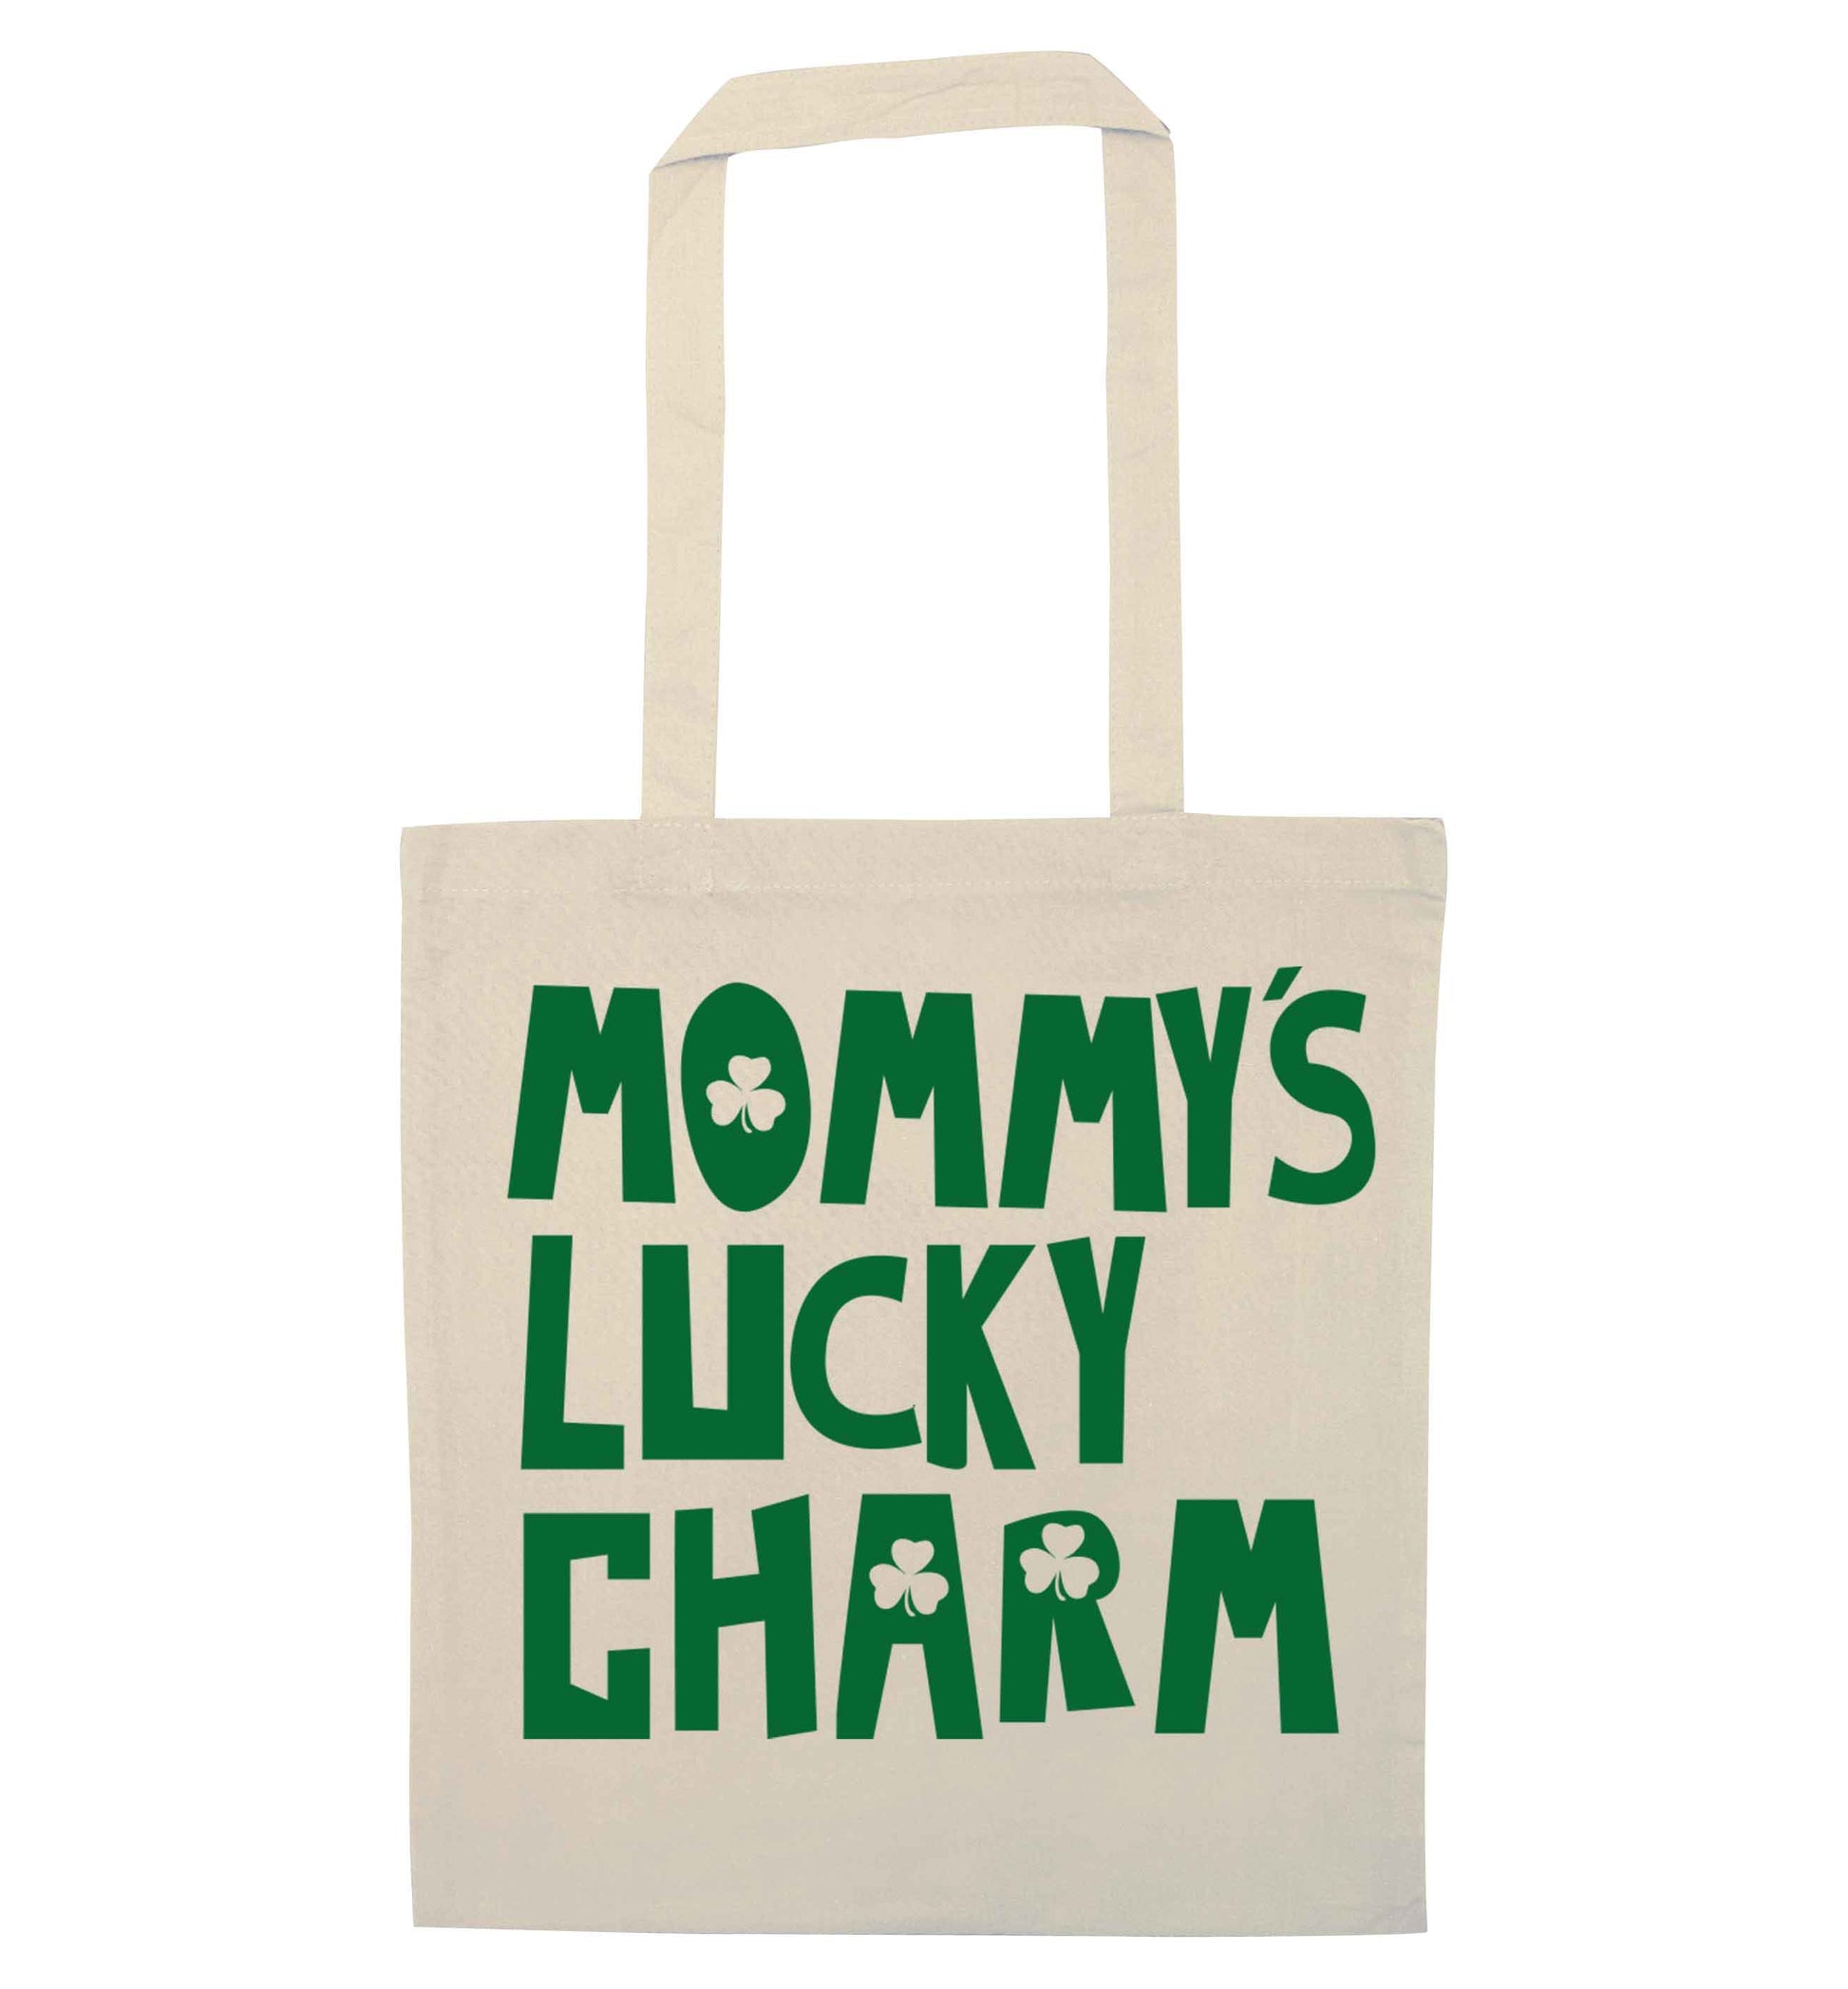 Mommy's lucky charm natural tote bag